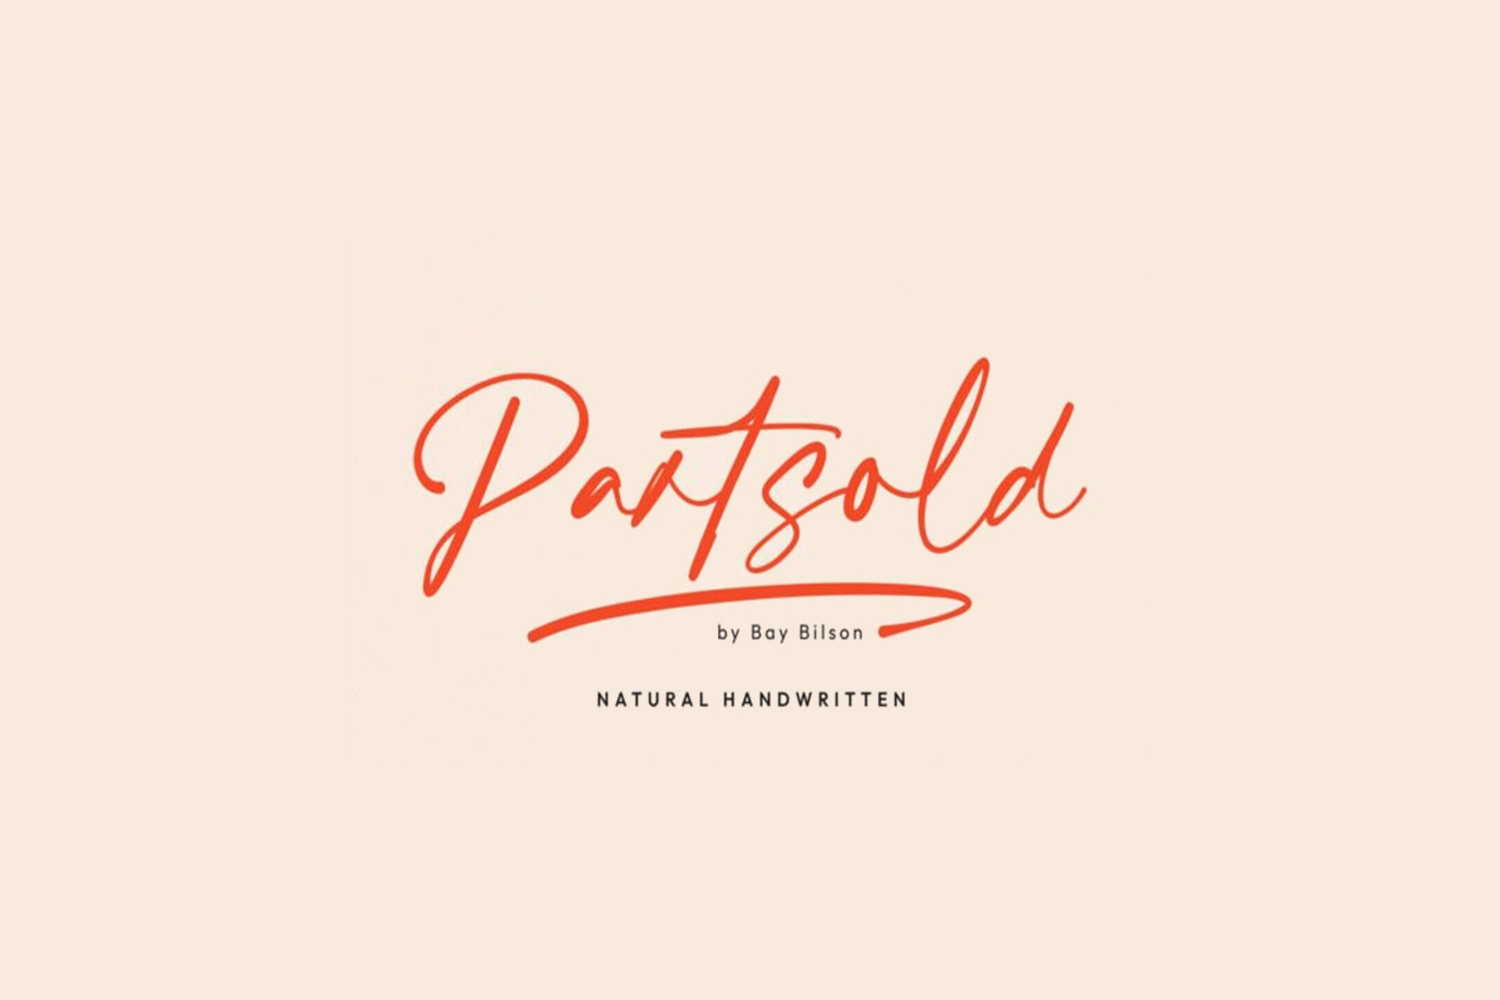 Partsold Free Font